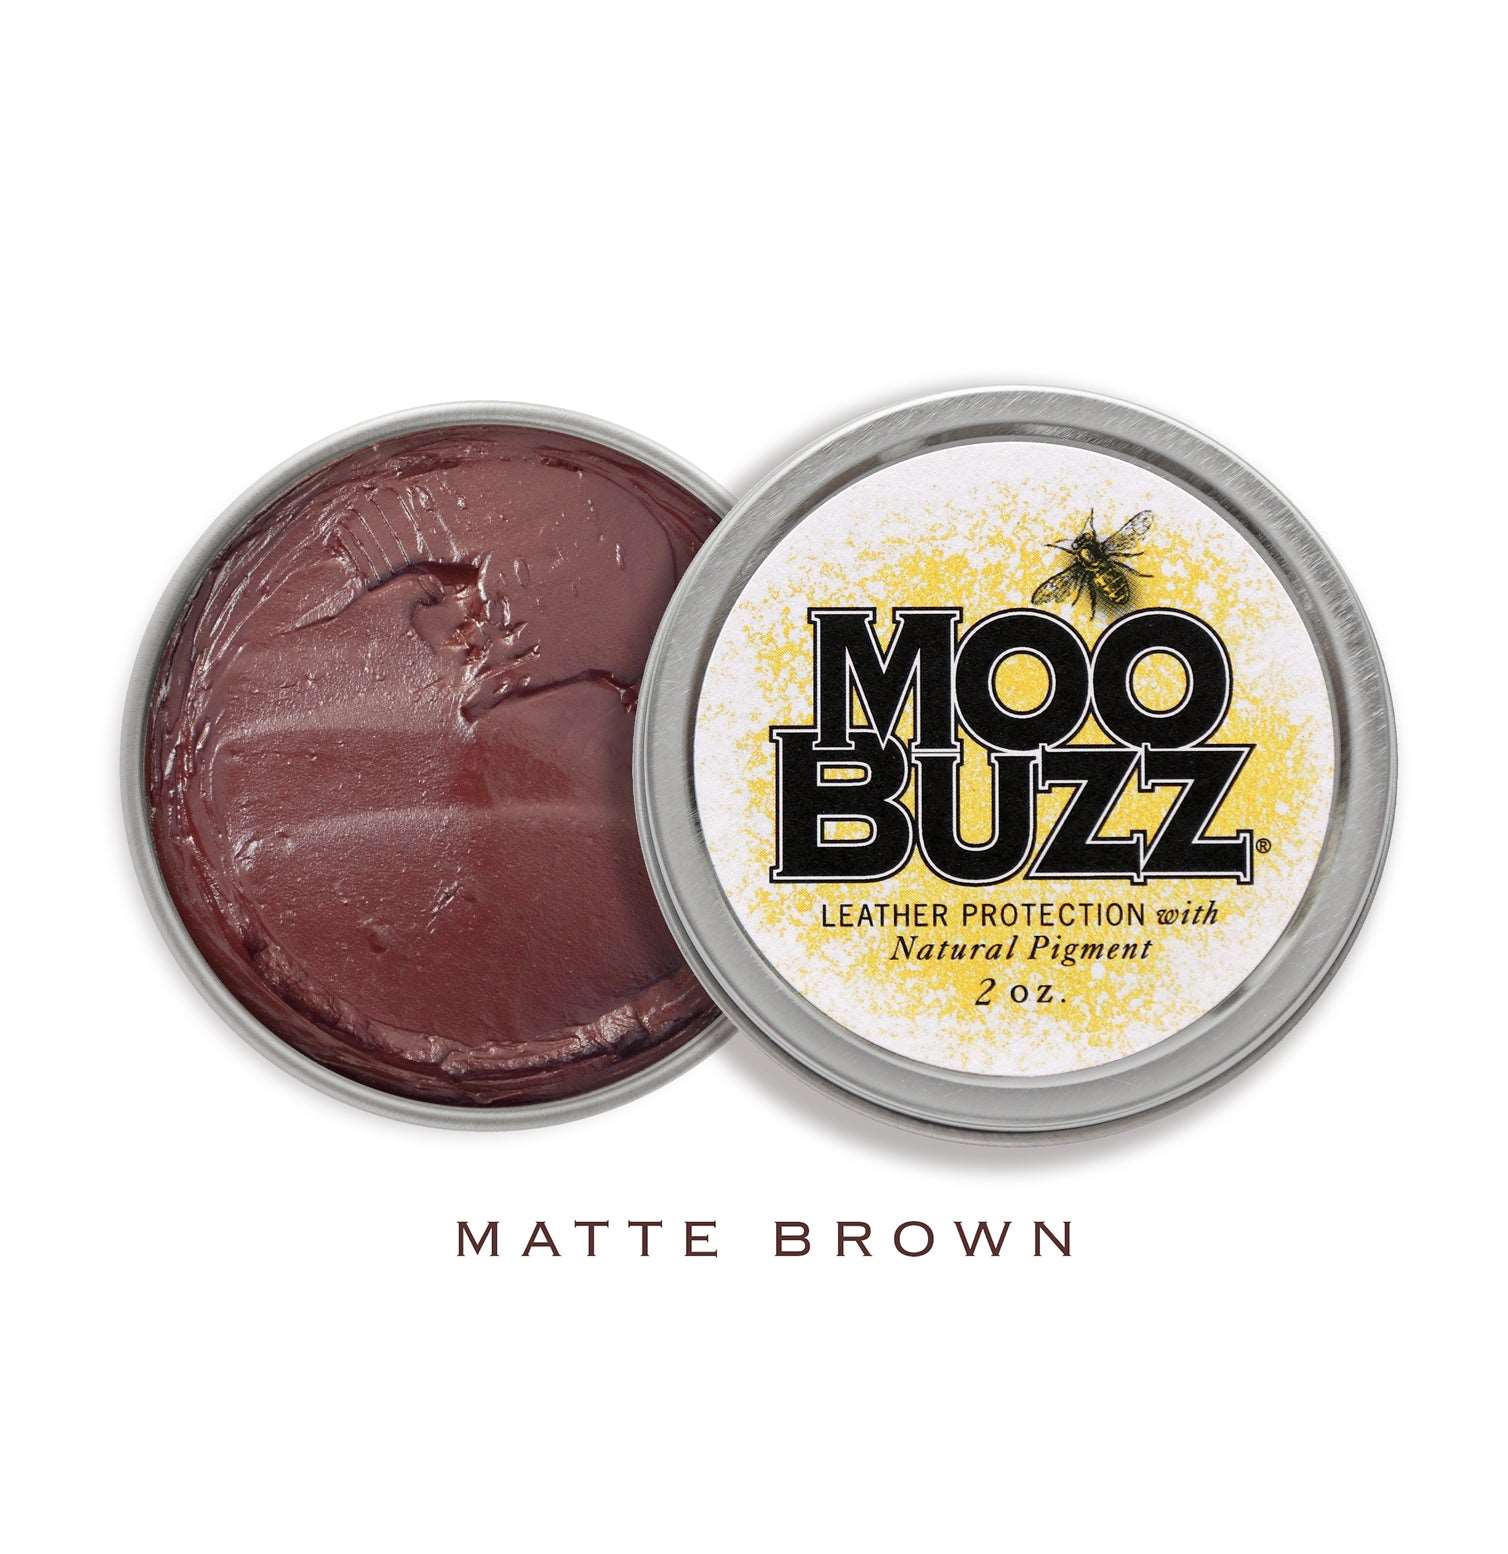 Open tin with MooBuzz logo and matte brown product.